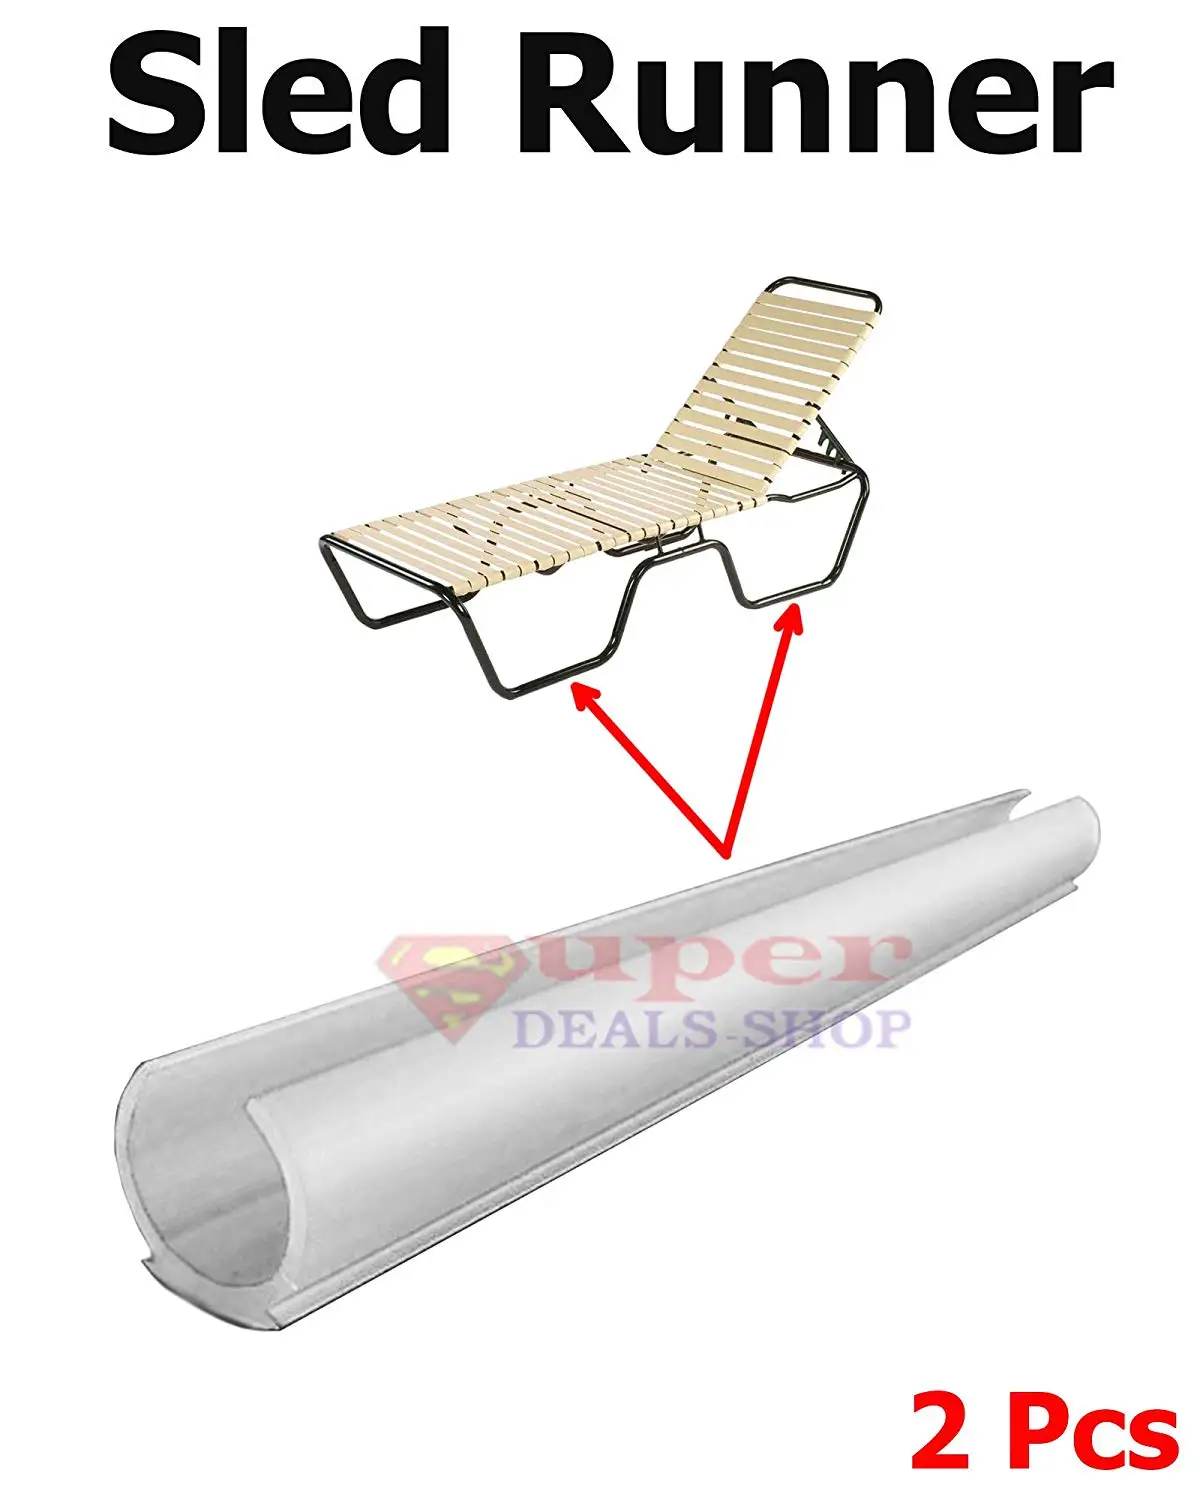 Buy 2 Pcs 12 Clear Vinyl Sled Glides Snap On Runners Chaise Fits